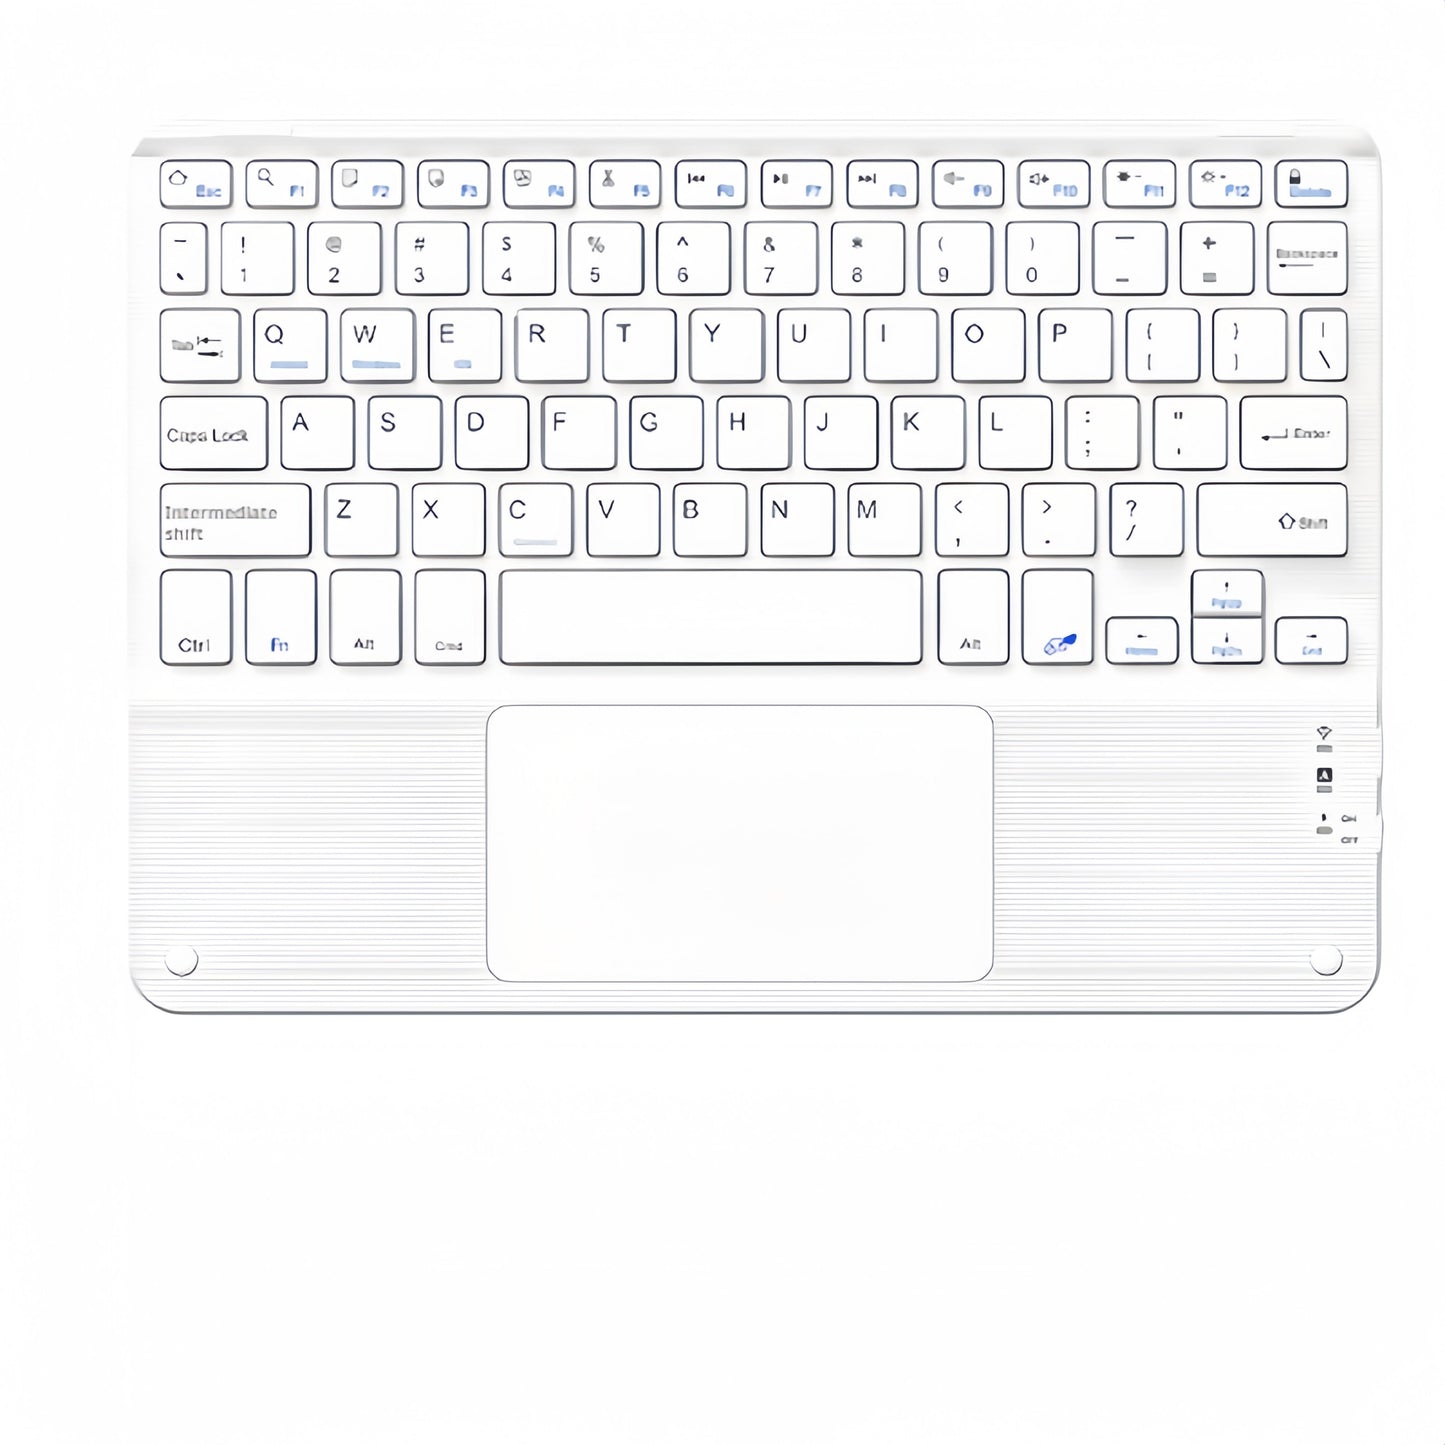 Wireless Keyboard, 10 Inches, Mini Keyboard With Touchpad, Ultra-thin Silent Multi-device, Supports Three Systems, Suitable For IPad IPhone Mobile Phones Tablet Computers Laptops Android IOS Windows System Devices